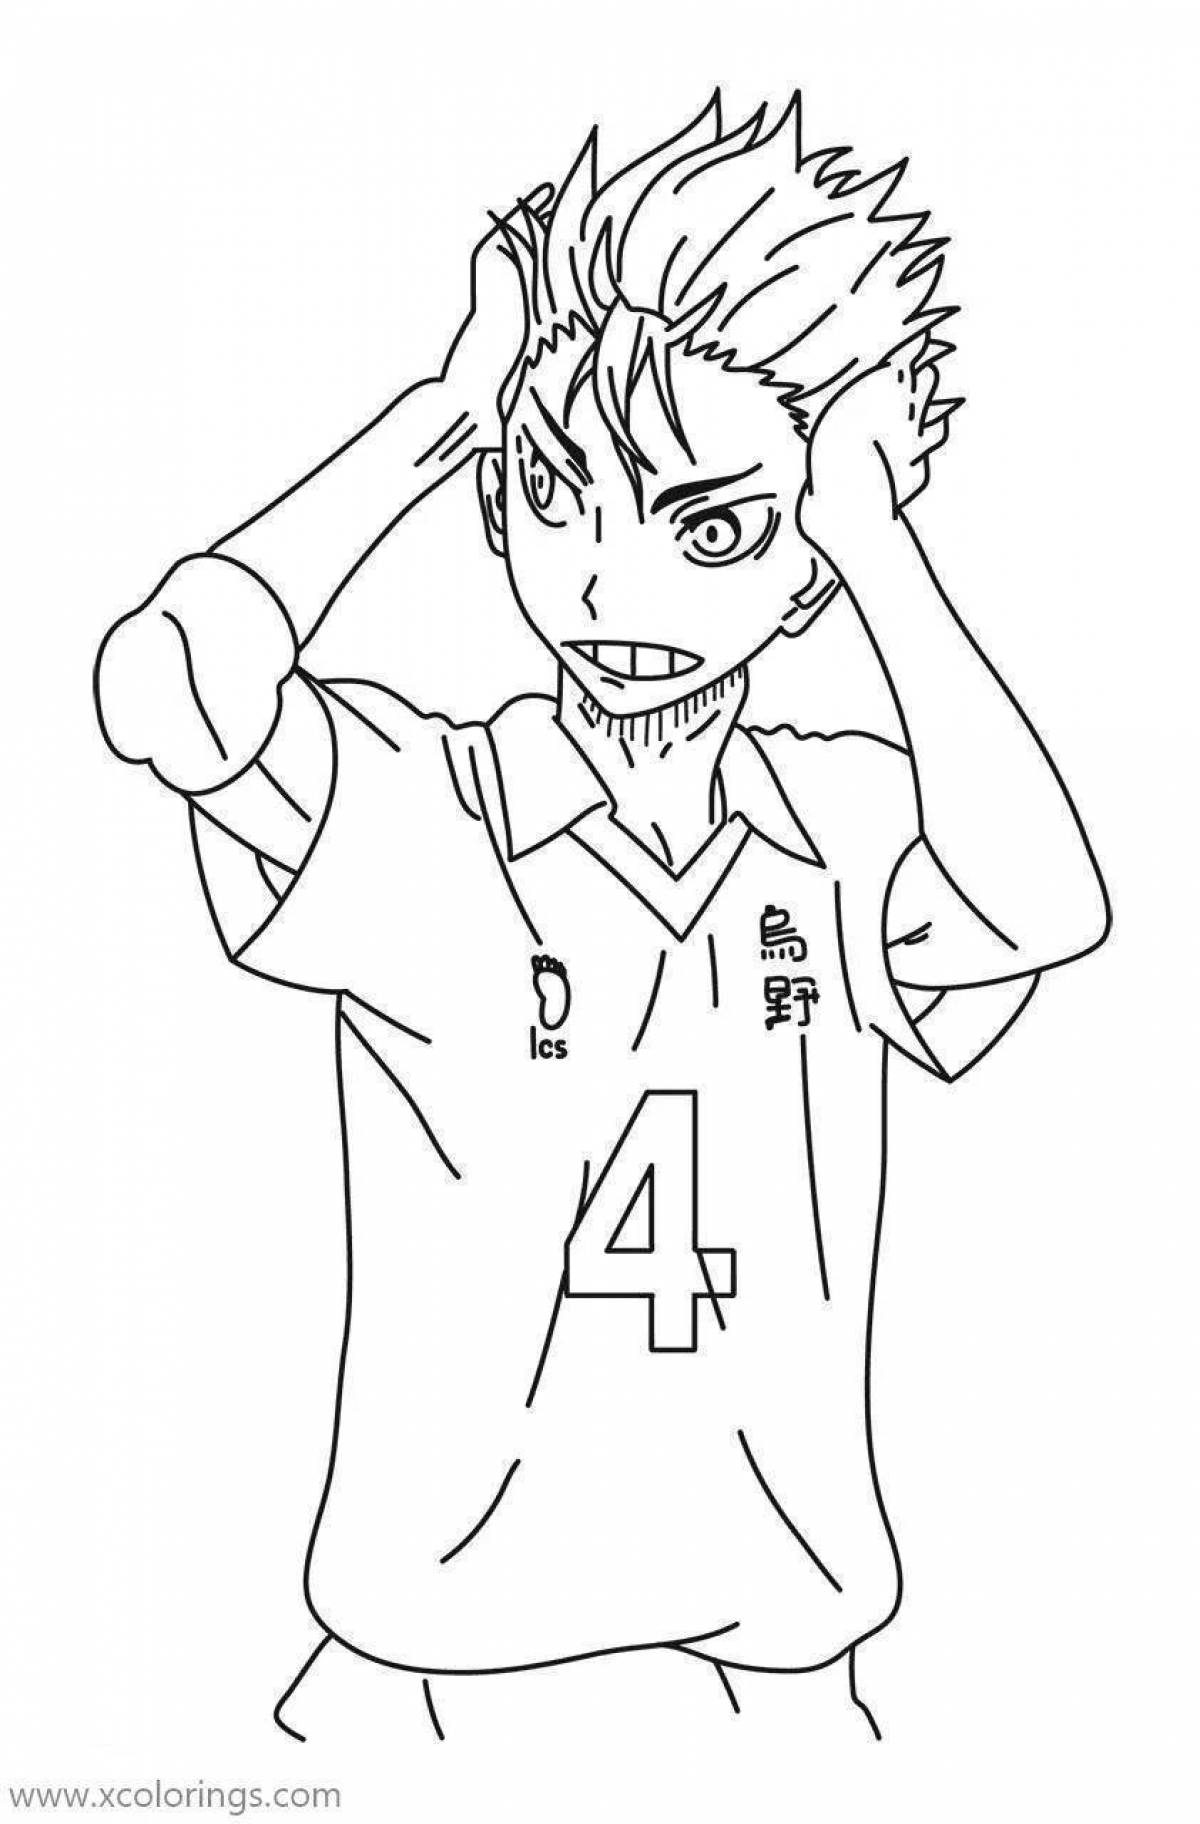 Funny anime volleyball coloring book